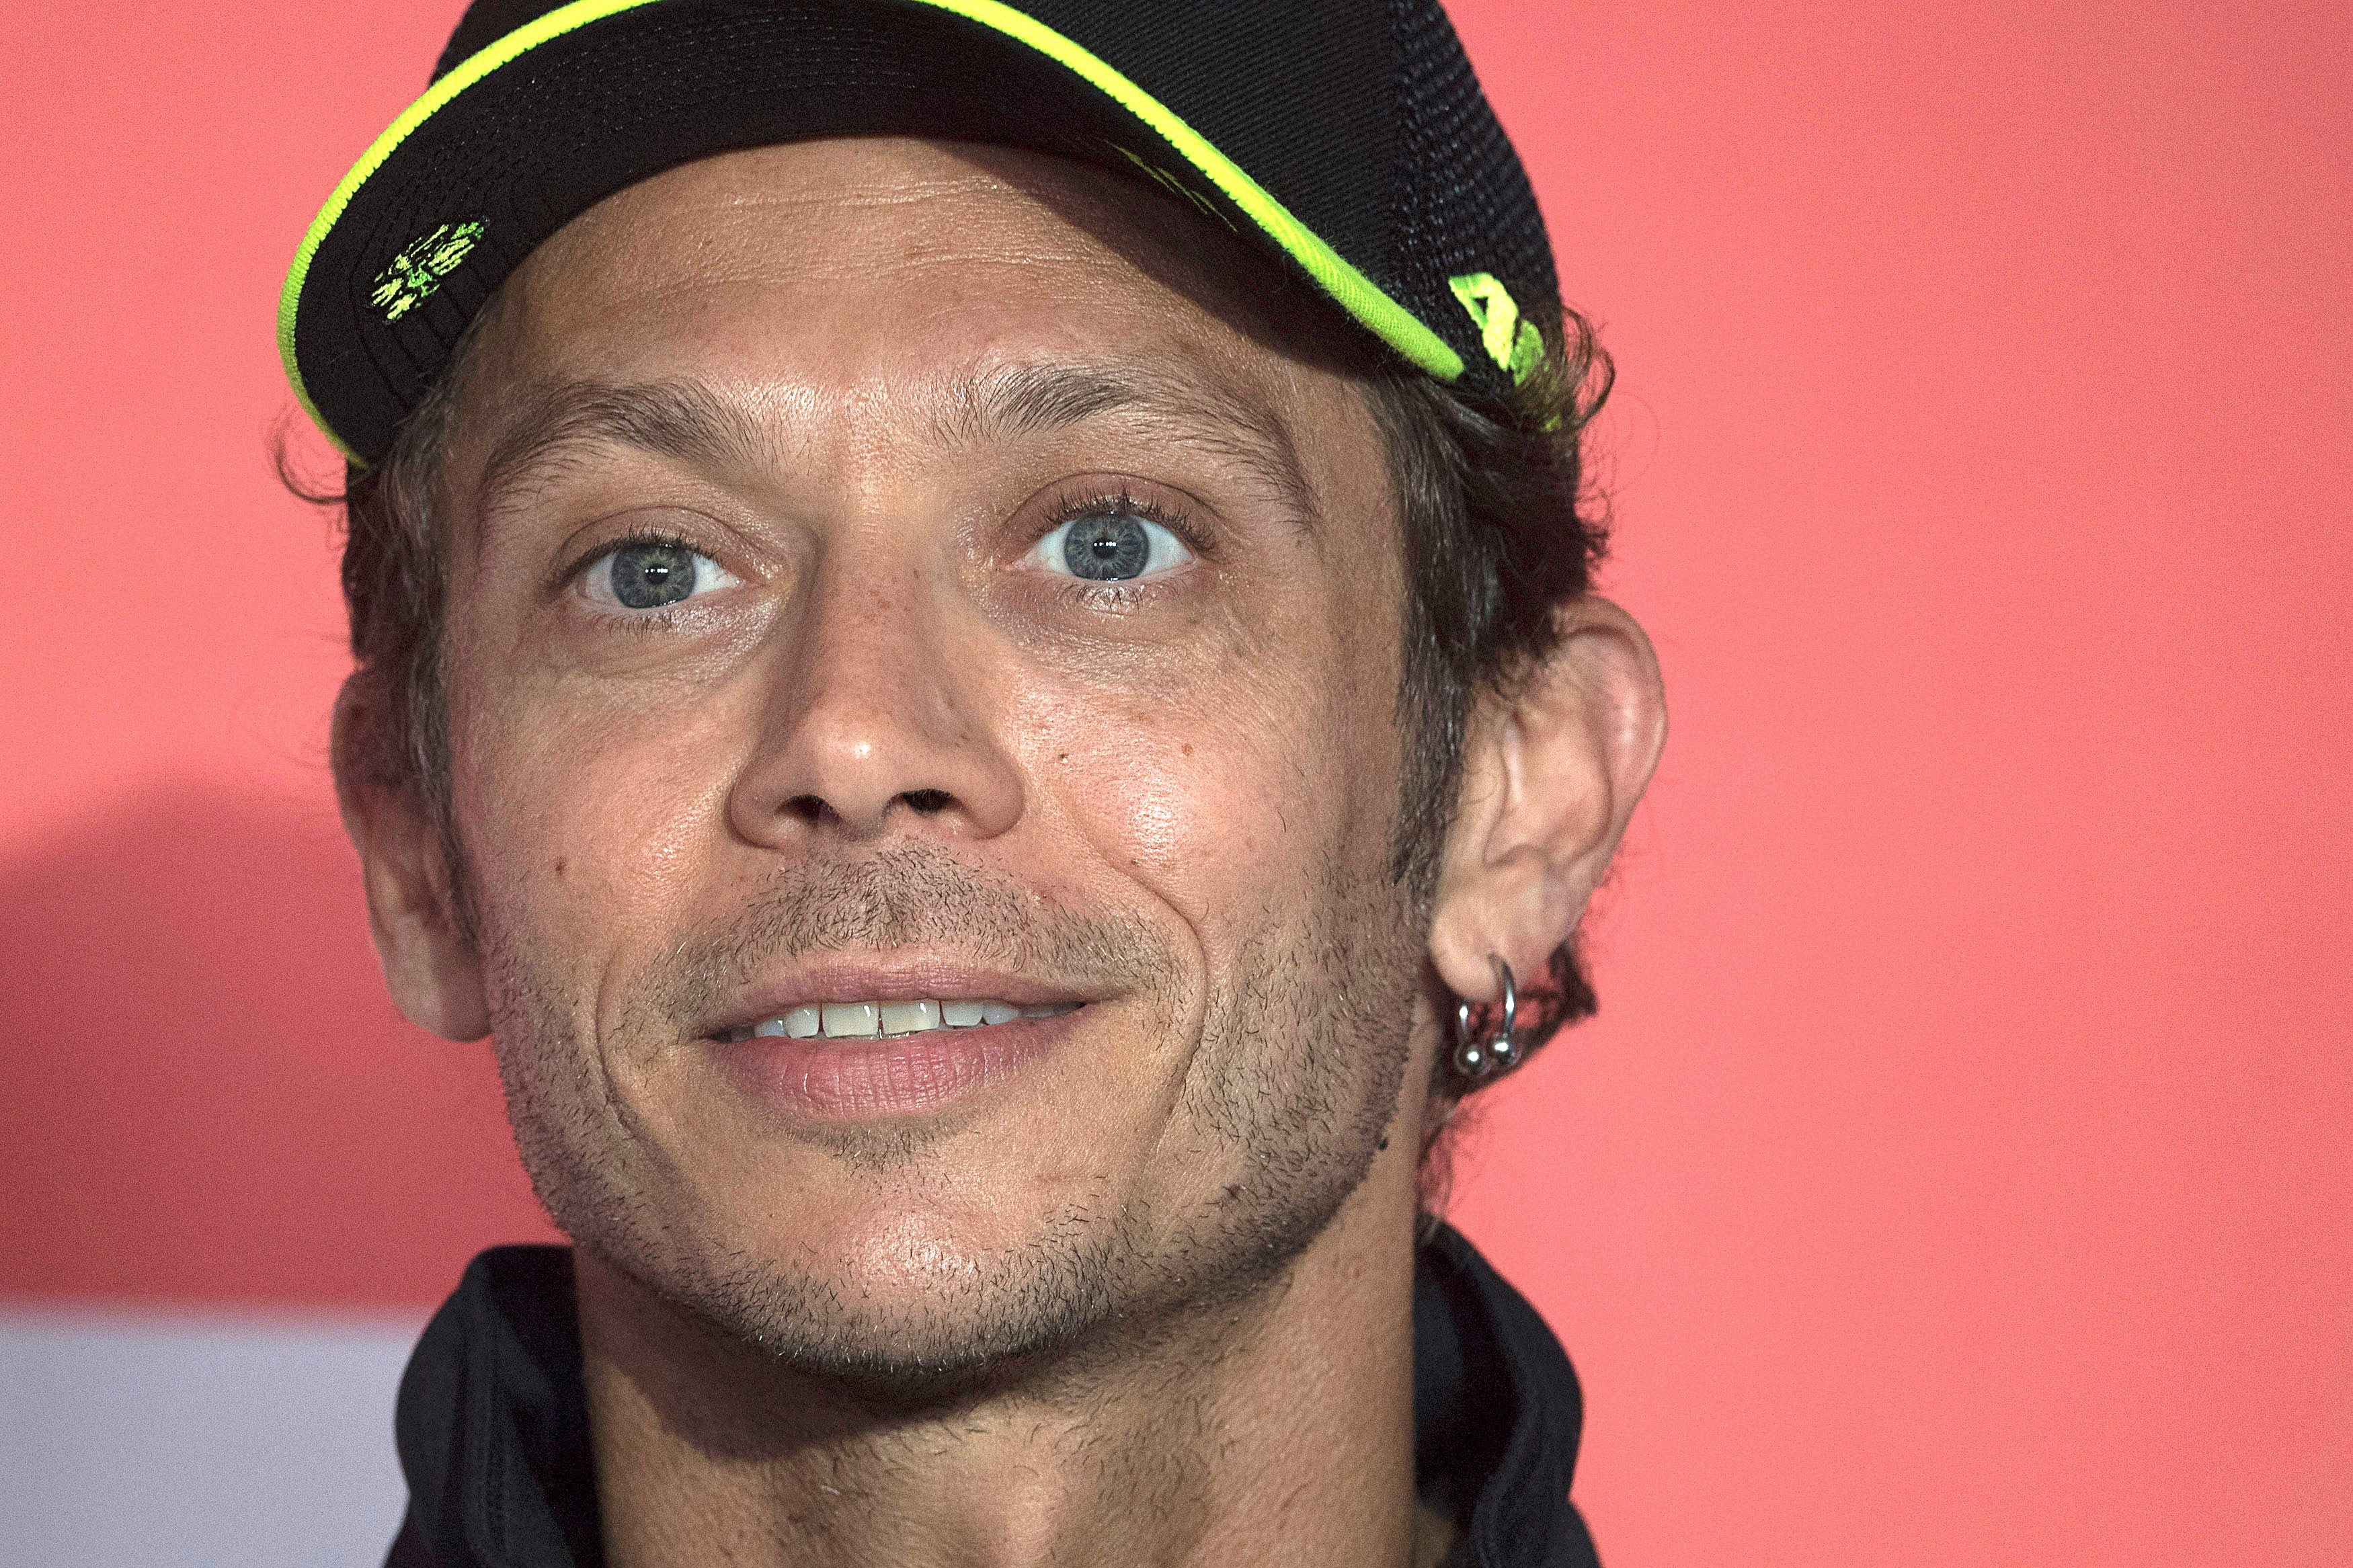 Valentino Rossi will hang up the leathers after the 2021 Moto GP season